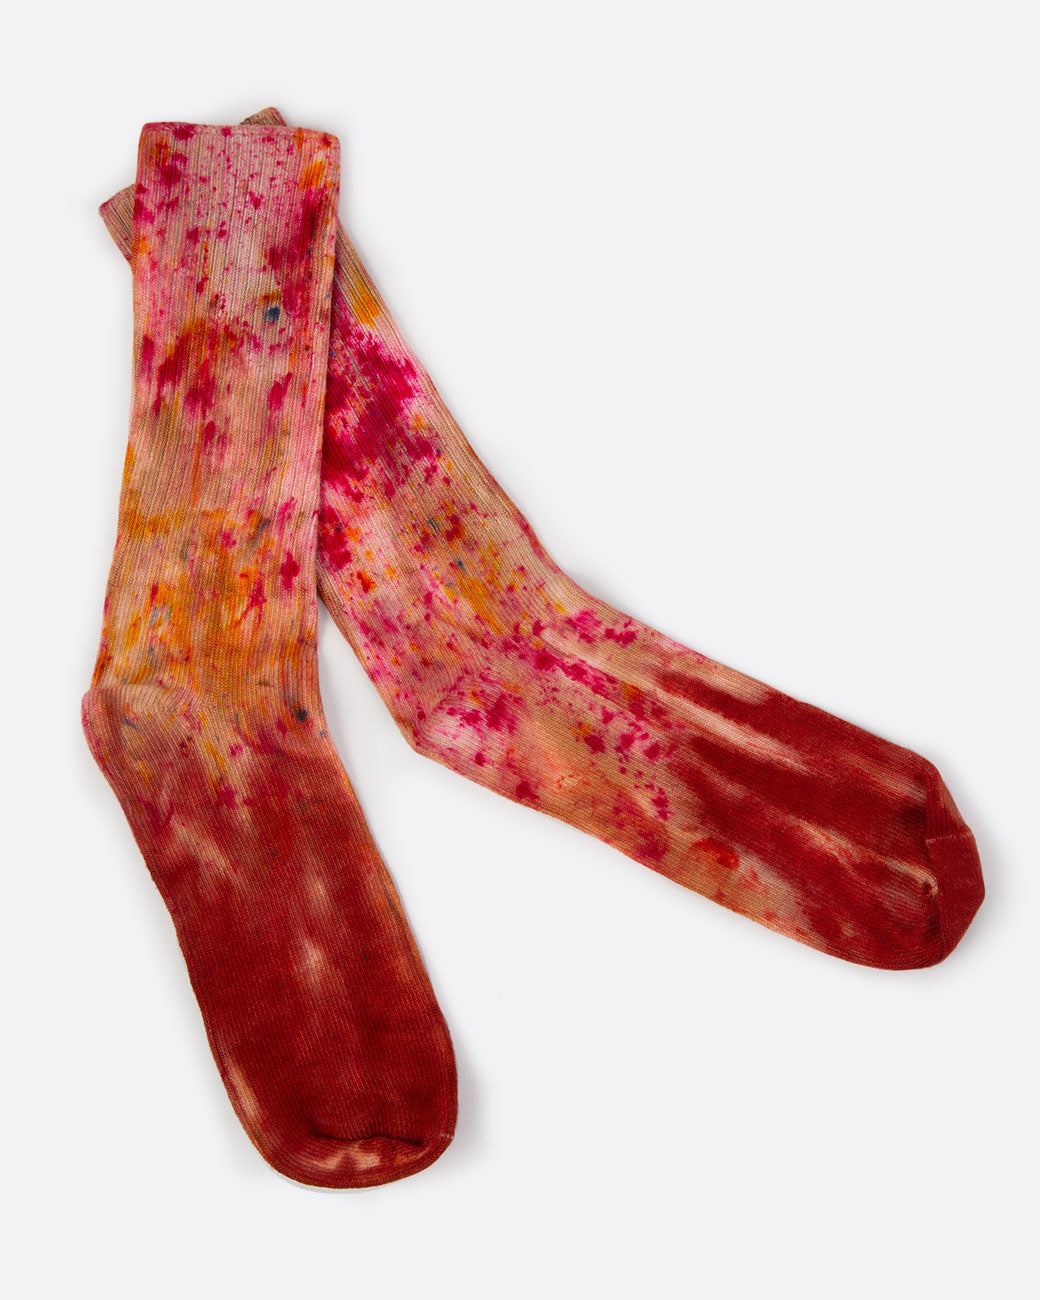 Hand dyed red socks, shown laying flat.